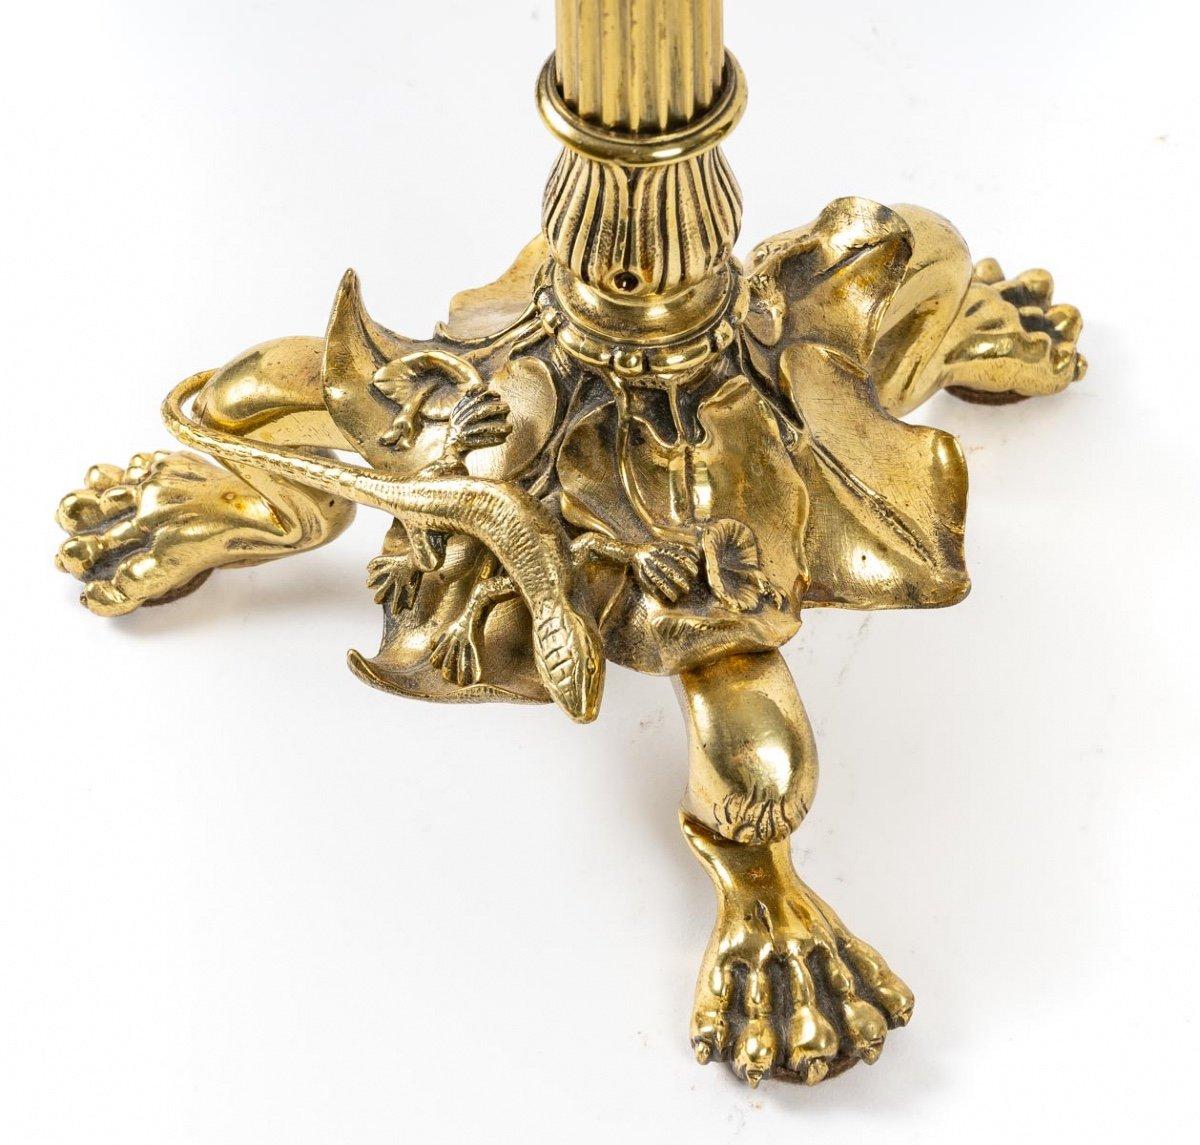 Lovely pair of gilt bronze candlesticks, attributed to Ferdinand Barbedienne.

The tripod base in the shape of lions' paws is surmounted by a collar formed of aquatic vegetation where a salamander wanders.

On the fluted, elegant and straight